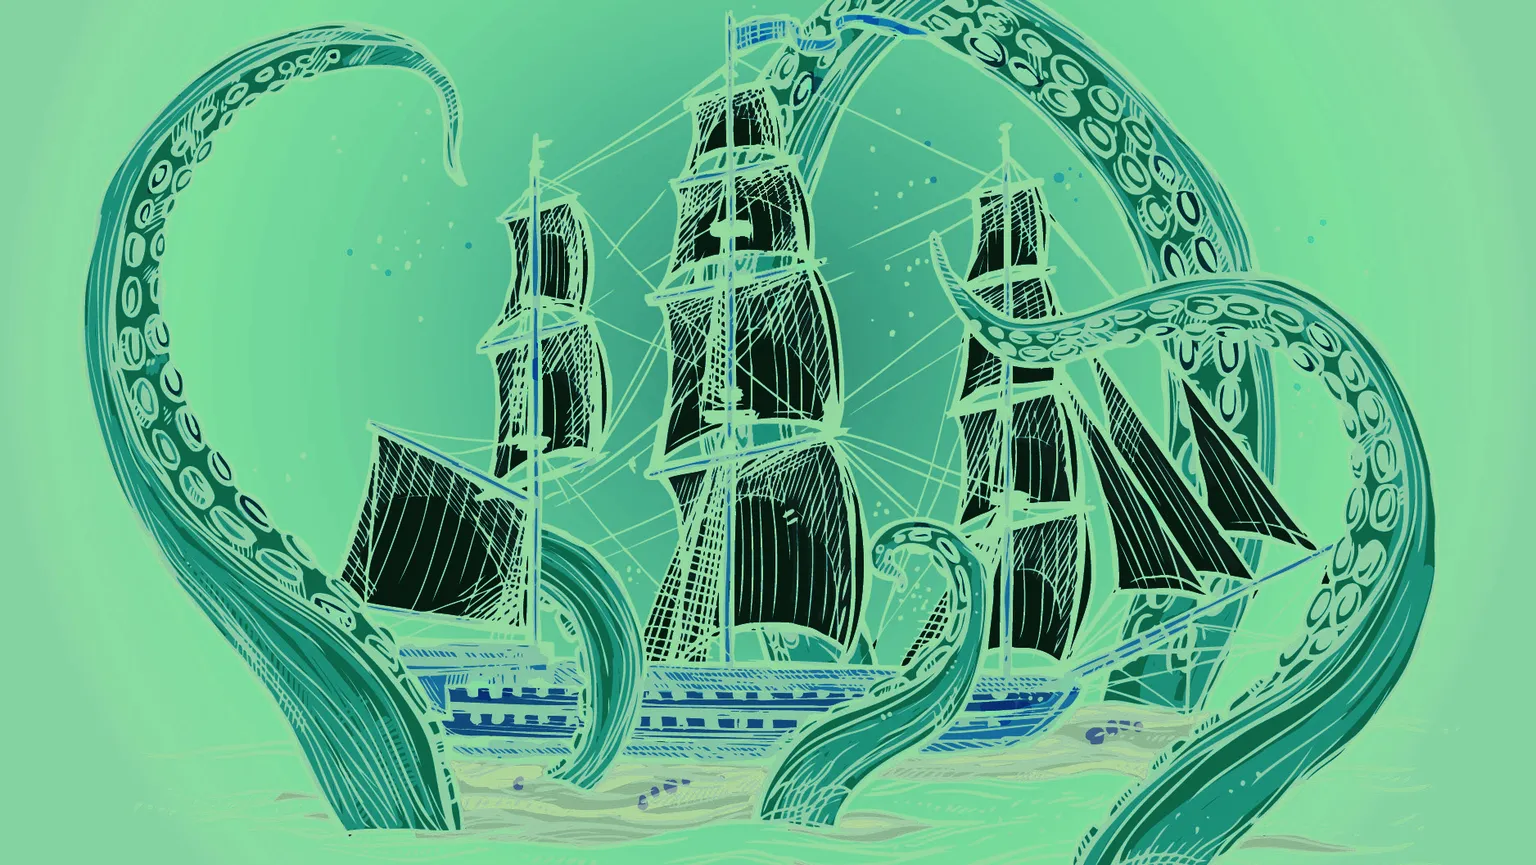 Crypto exchange Kraken has been referred to the Department of Financial Services, alongside Binance and Gate.io. PHOTO CREDIT: Shutterstock